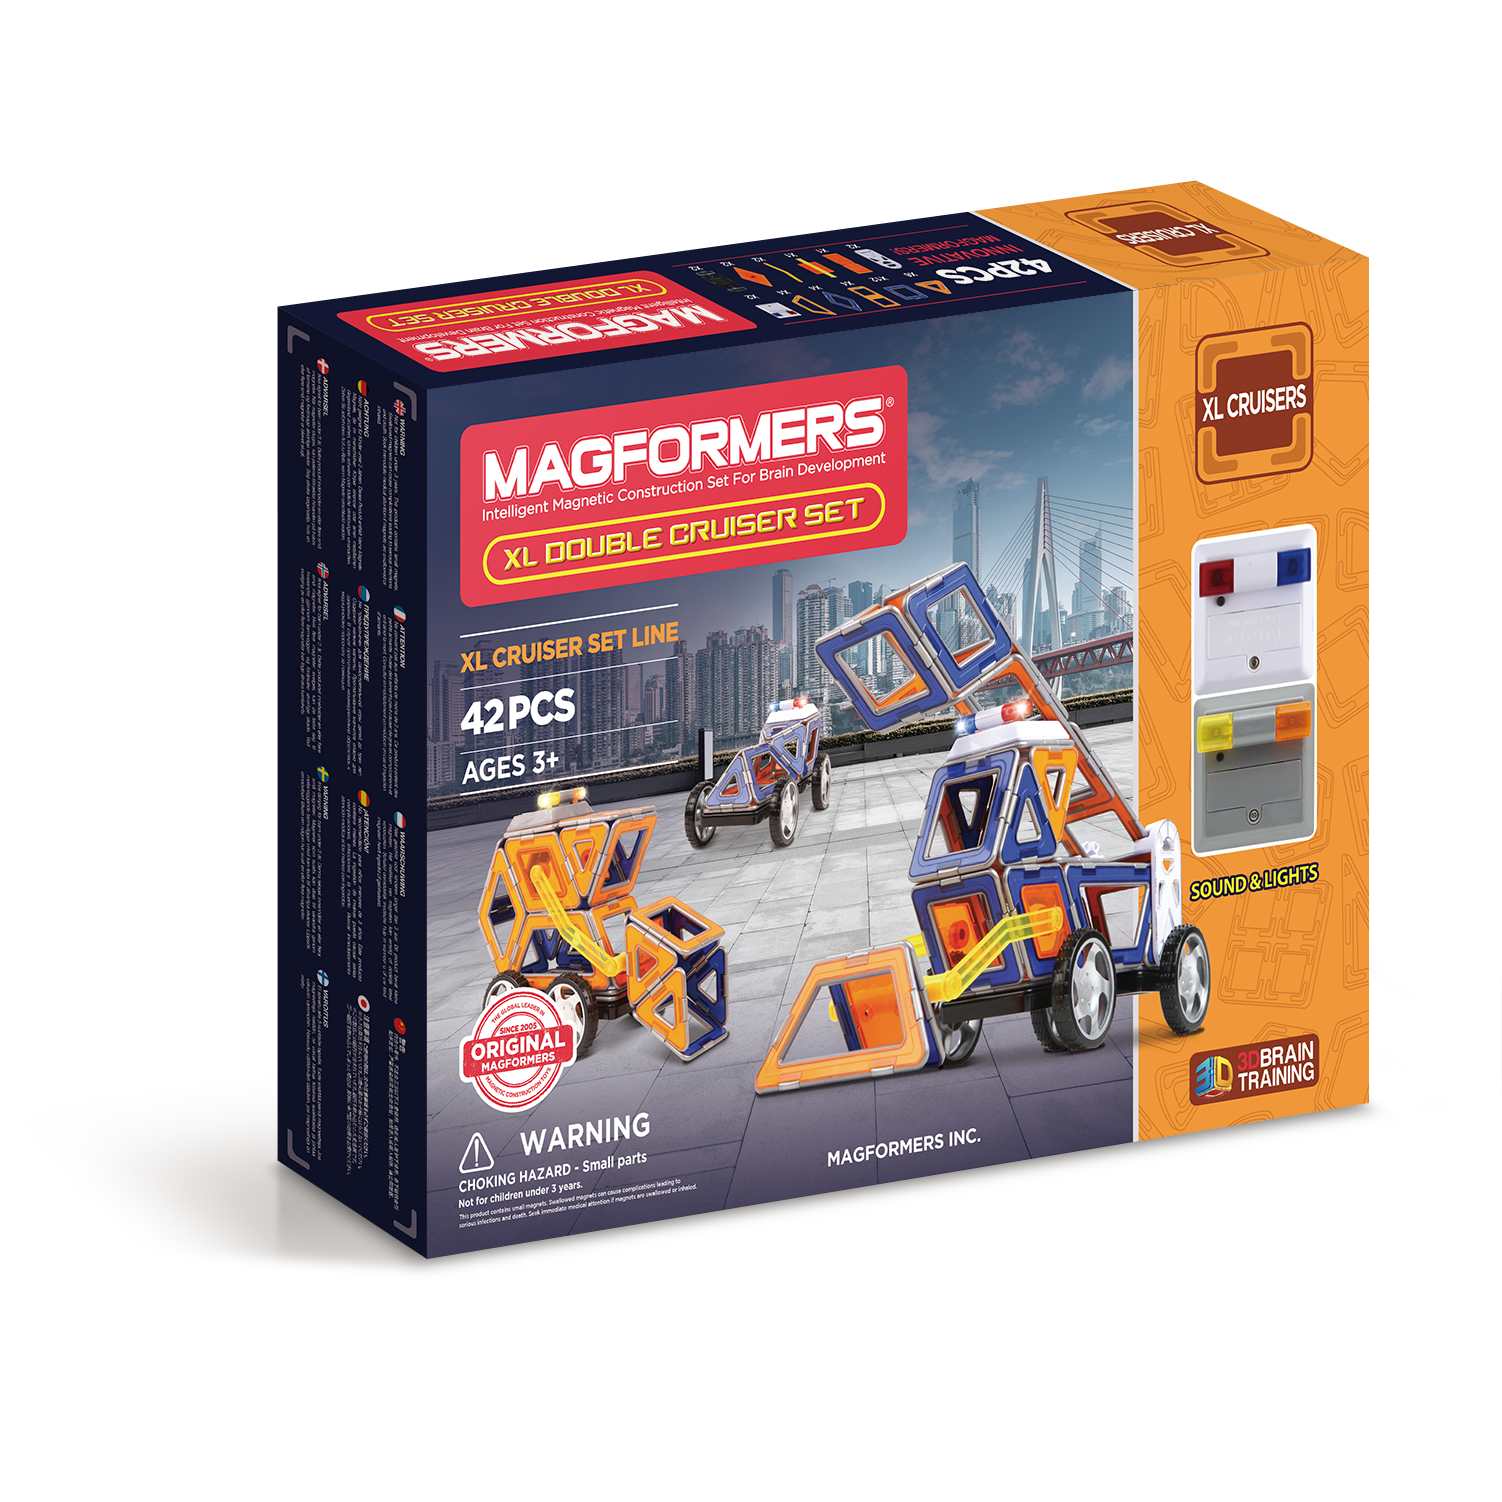 Magformers XL Double Cruiser